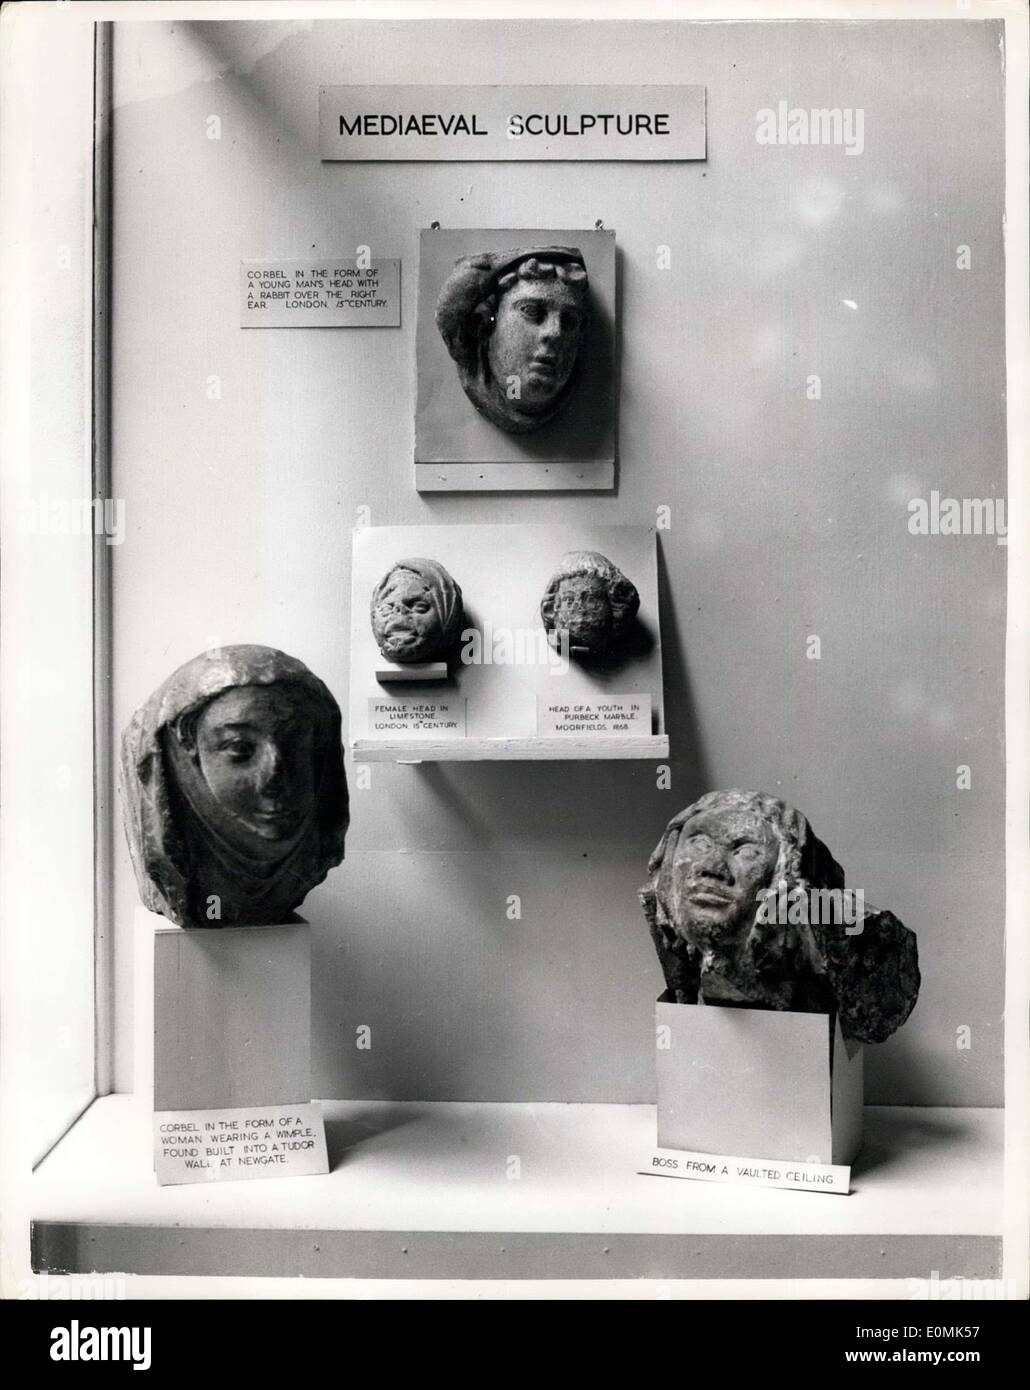 Oct. 04, 1955 - Archaeology Exhibition At Royal Exchange: An exhibition organised by the London and Middlesex Archaeological Society, to mark the its centenary, was opened at the Royal Exchange today by the Lord Mayor of London, Sir Seymour Howard. Photo shows Mediavel sculpture from the city of London - seen at the exhibition. Stock Photo